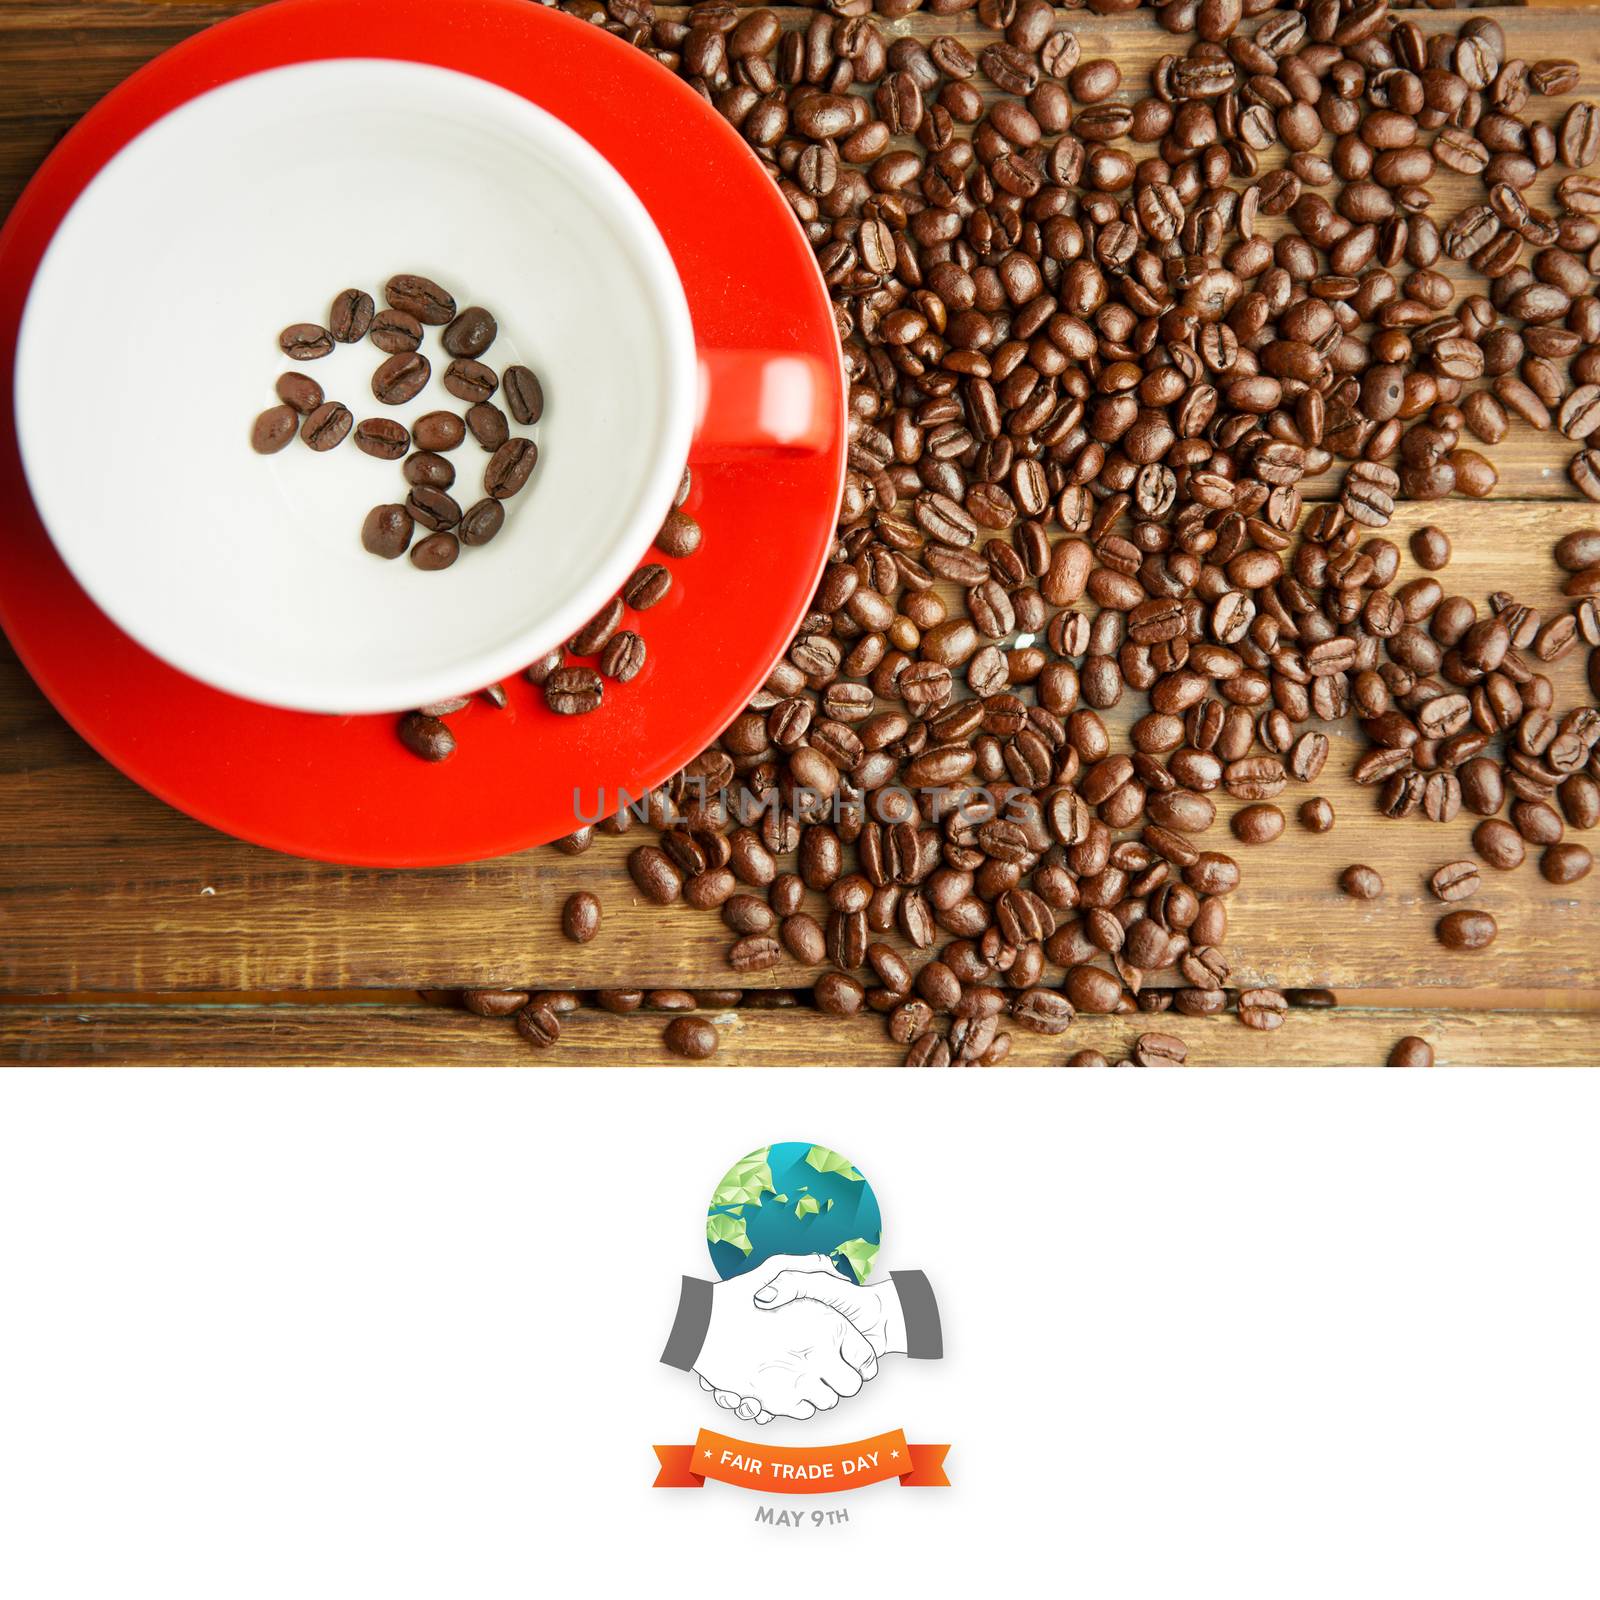 Fair Trade graphic against coffee beans in cup